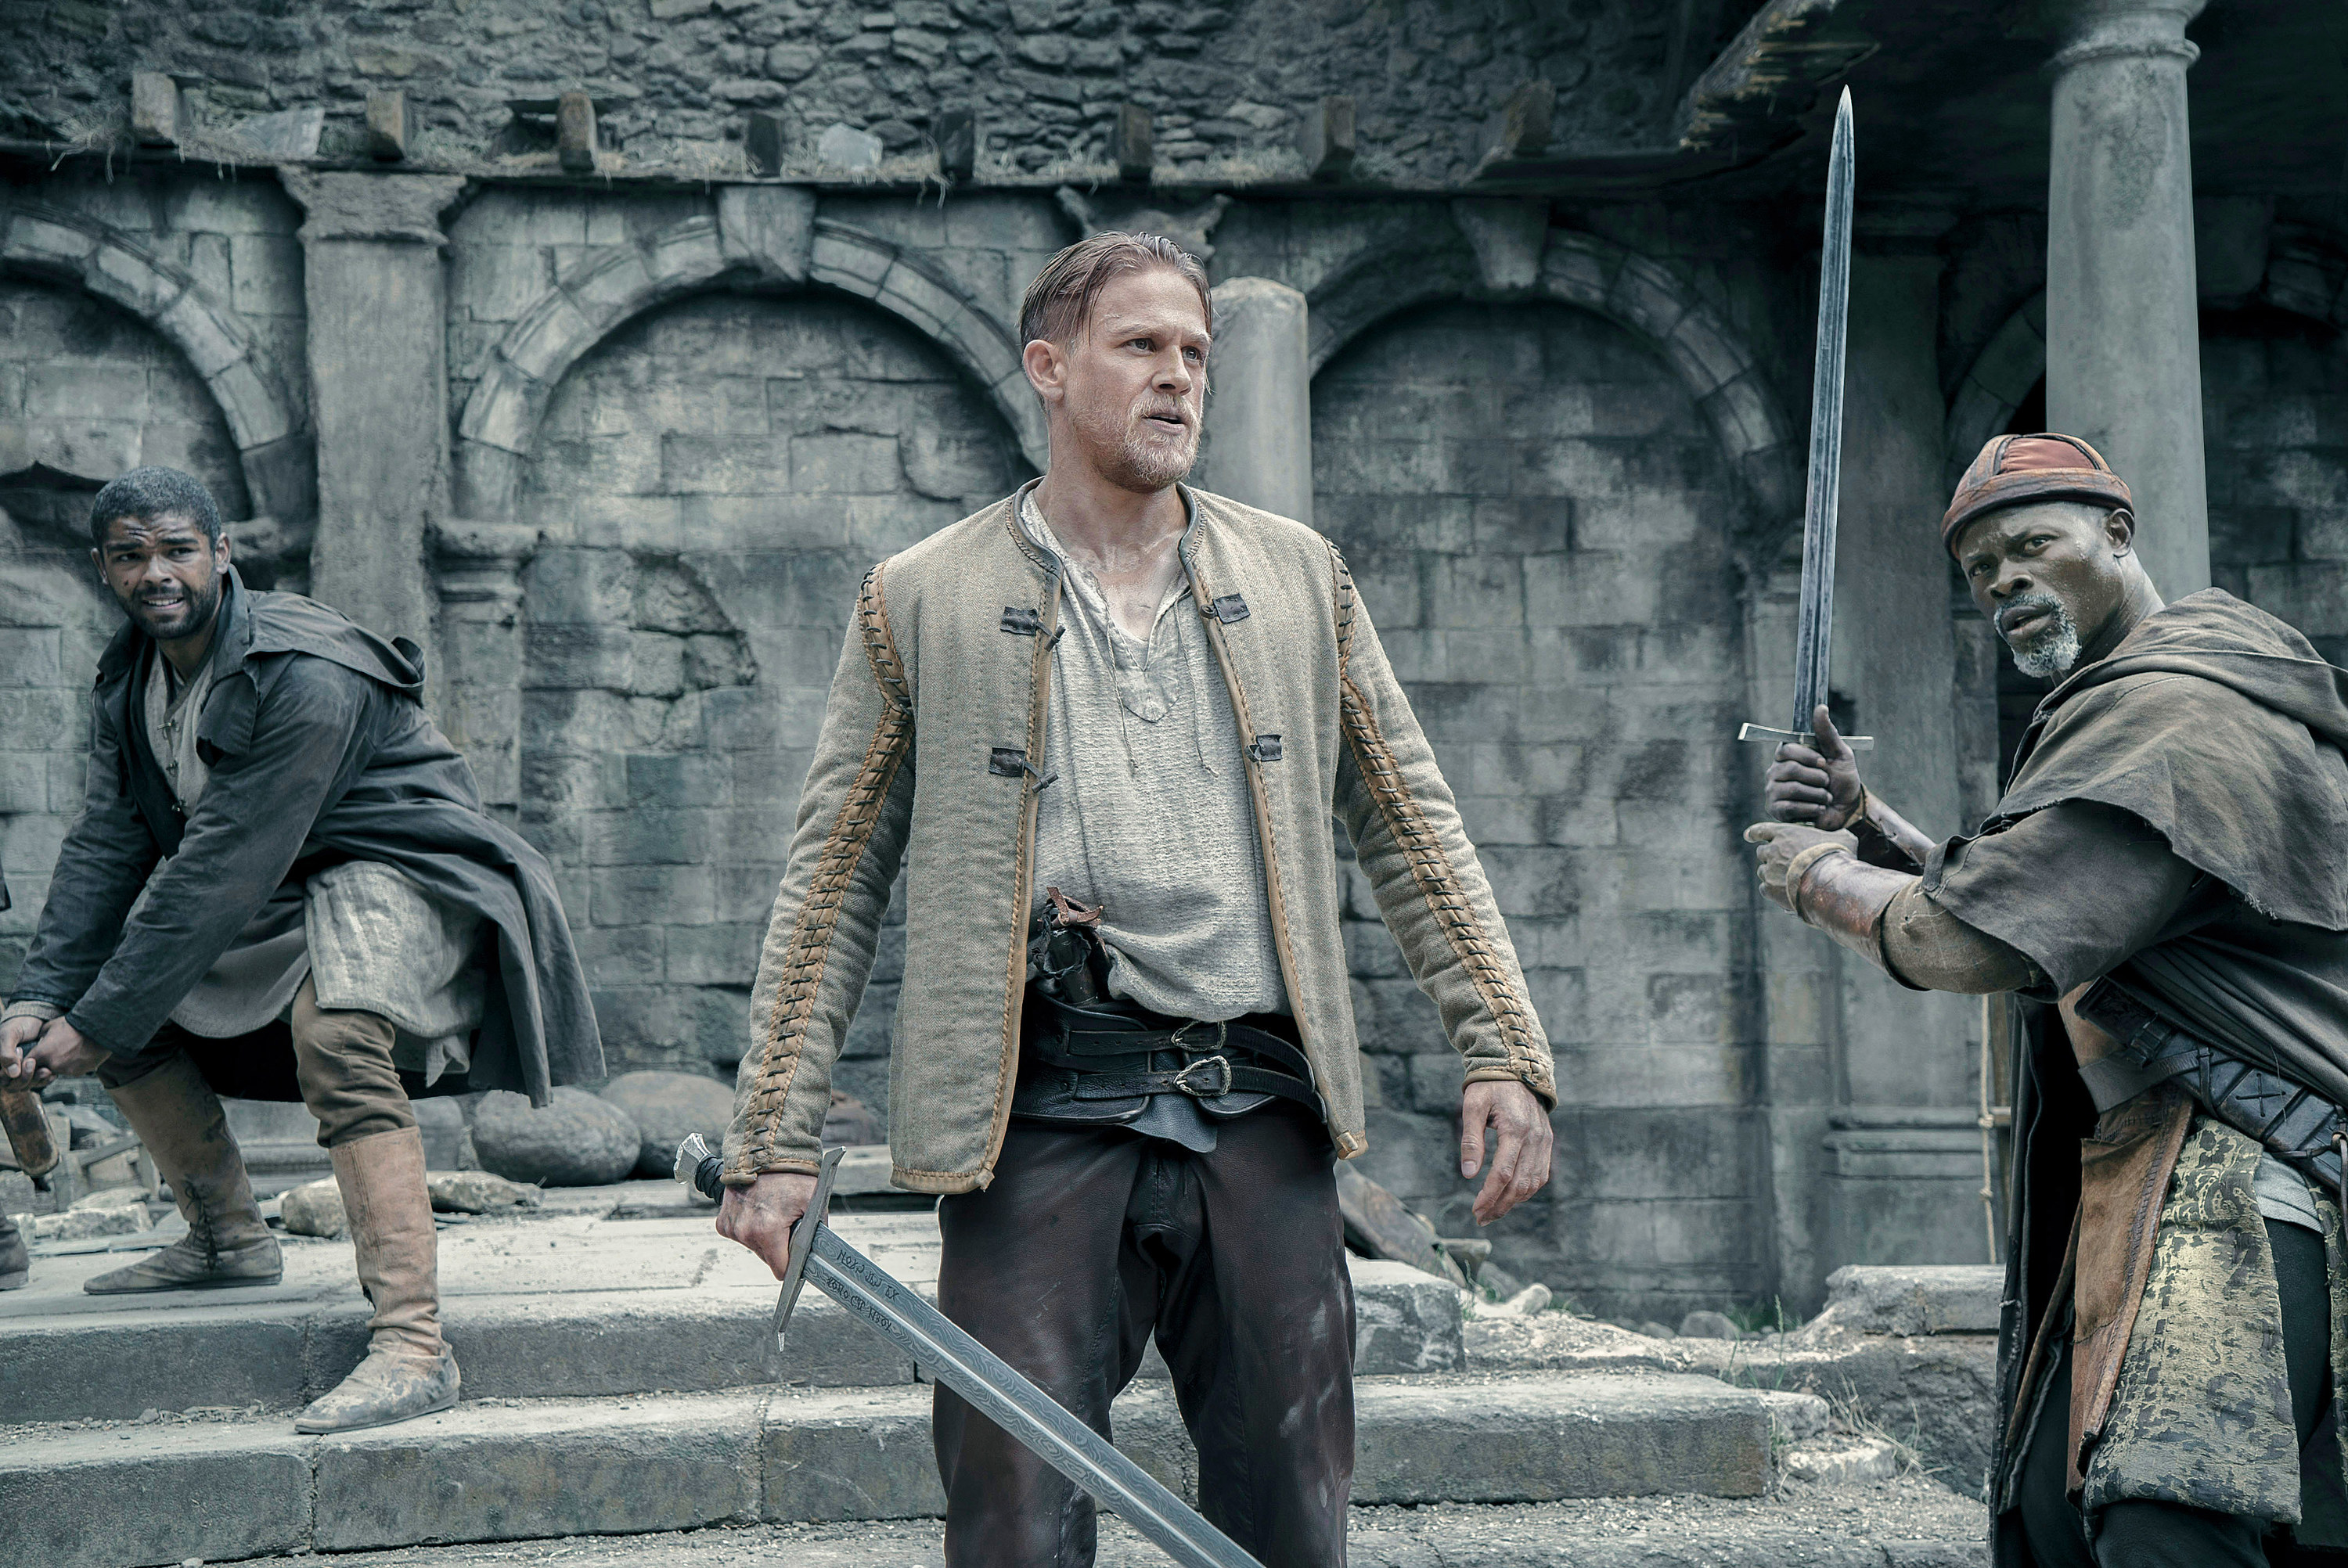 Kingsley Ben-Adir, Charlie Hunnam, and Djimon Hounsou hold swords, like they&#x27;re about to fight, during a scene in the movie